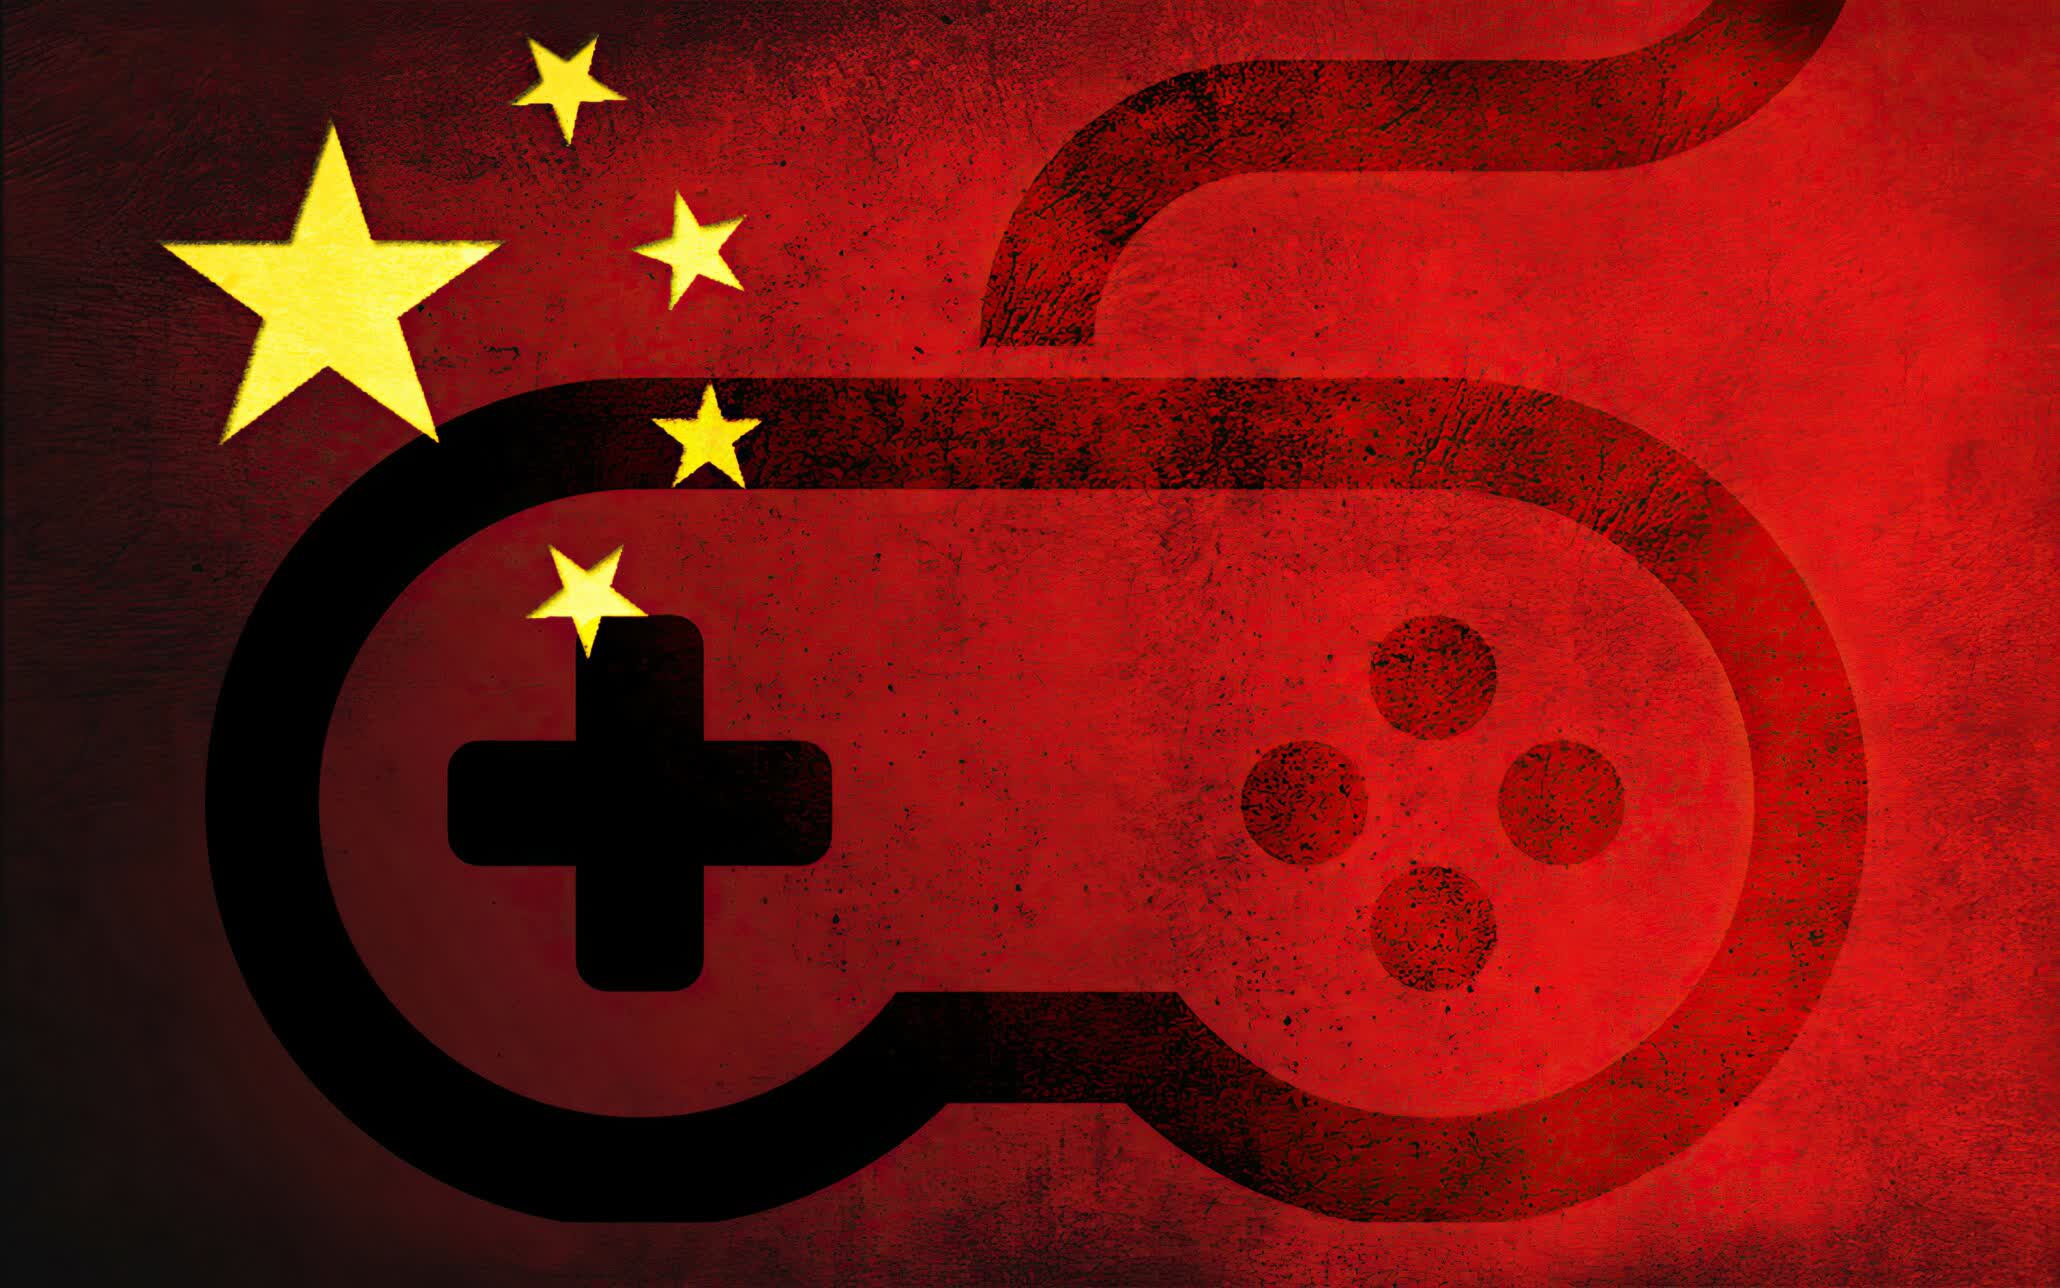 Over 200 Chinese gaming firms pledge to follow the country's strict new game industry rules